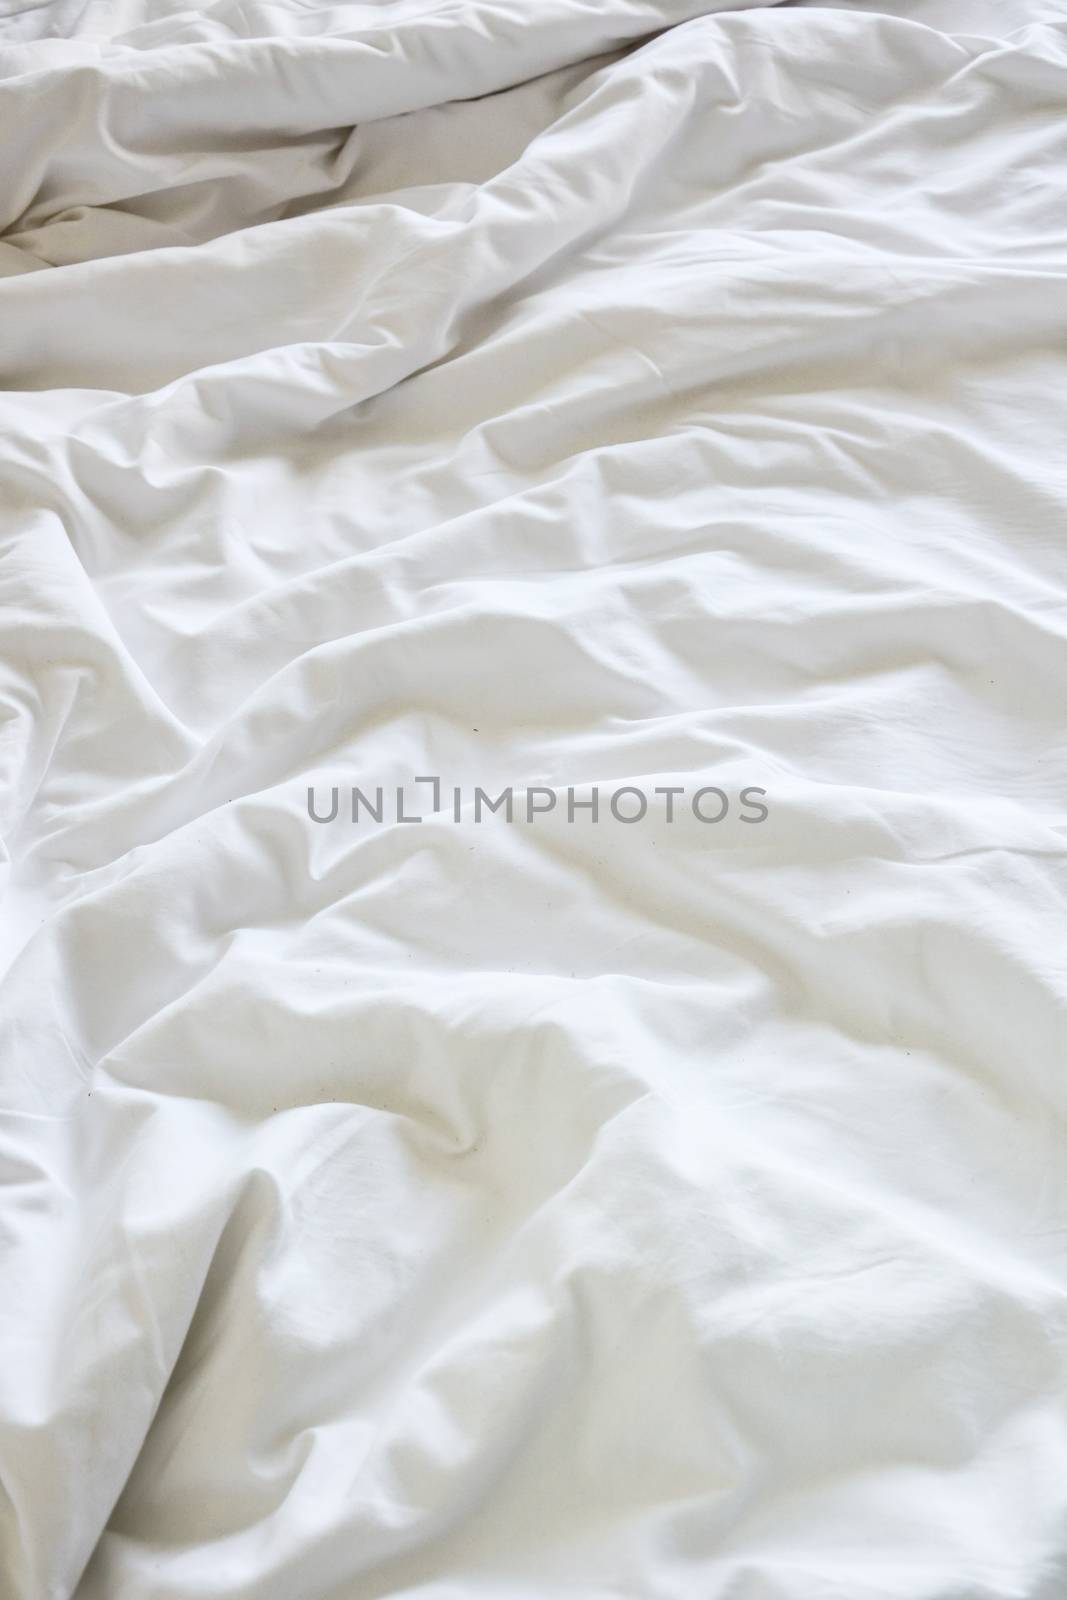 wrinkle messy blanket in bedroom after waking up in the morning, by rakoptonLPN